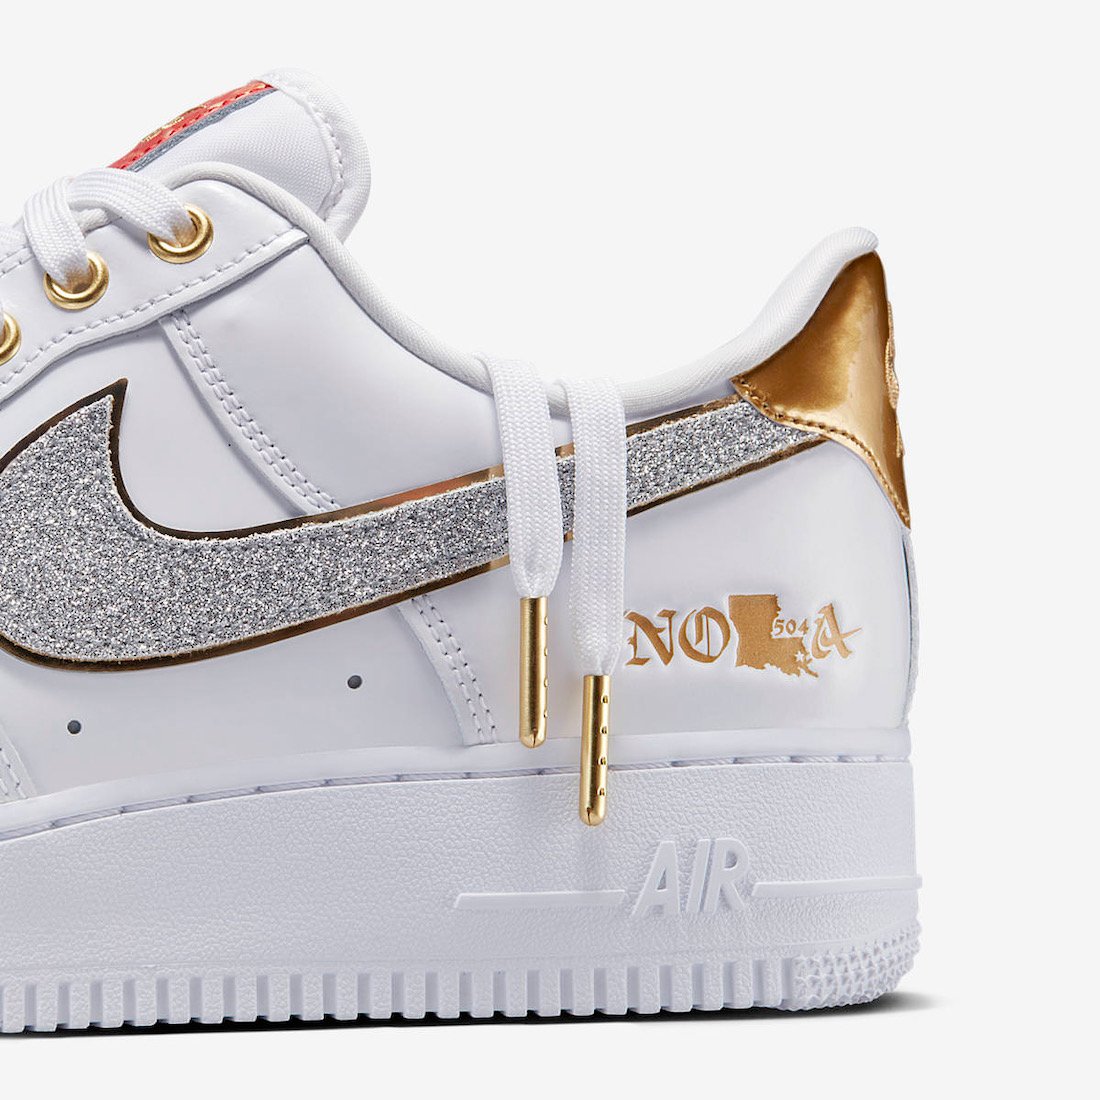 Nike Air Force 1 Low NOLA DZ5425-100 Release Date Info